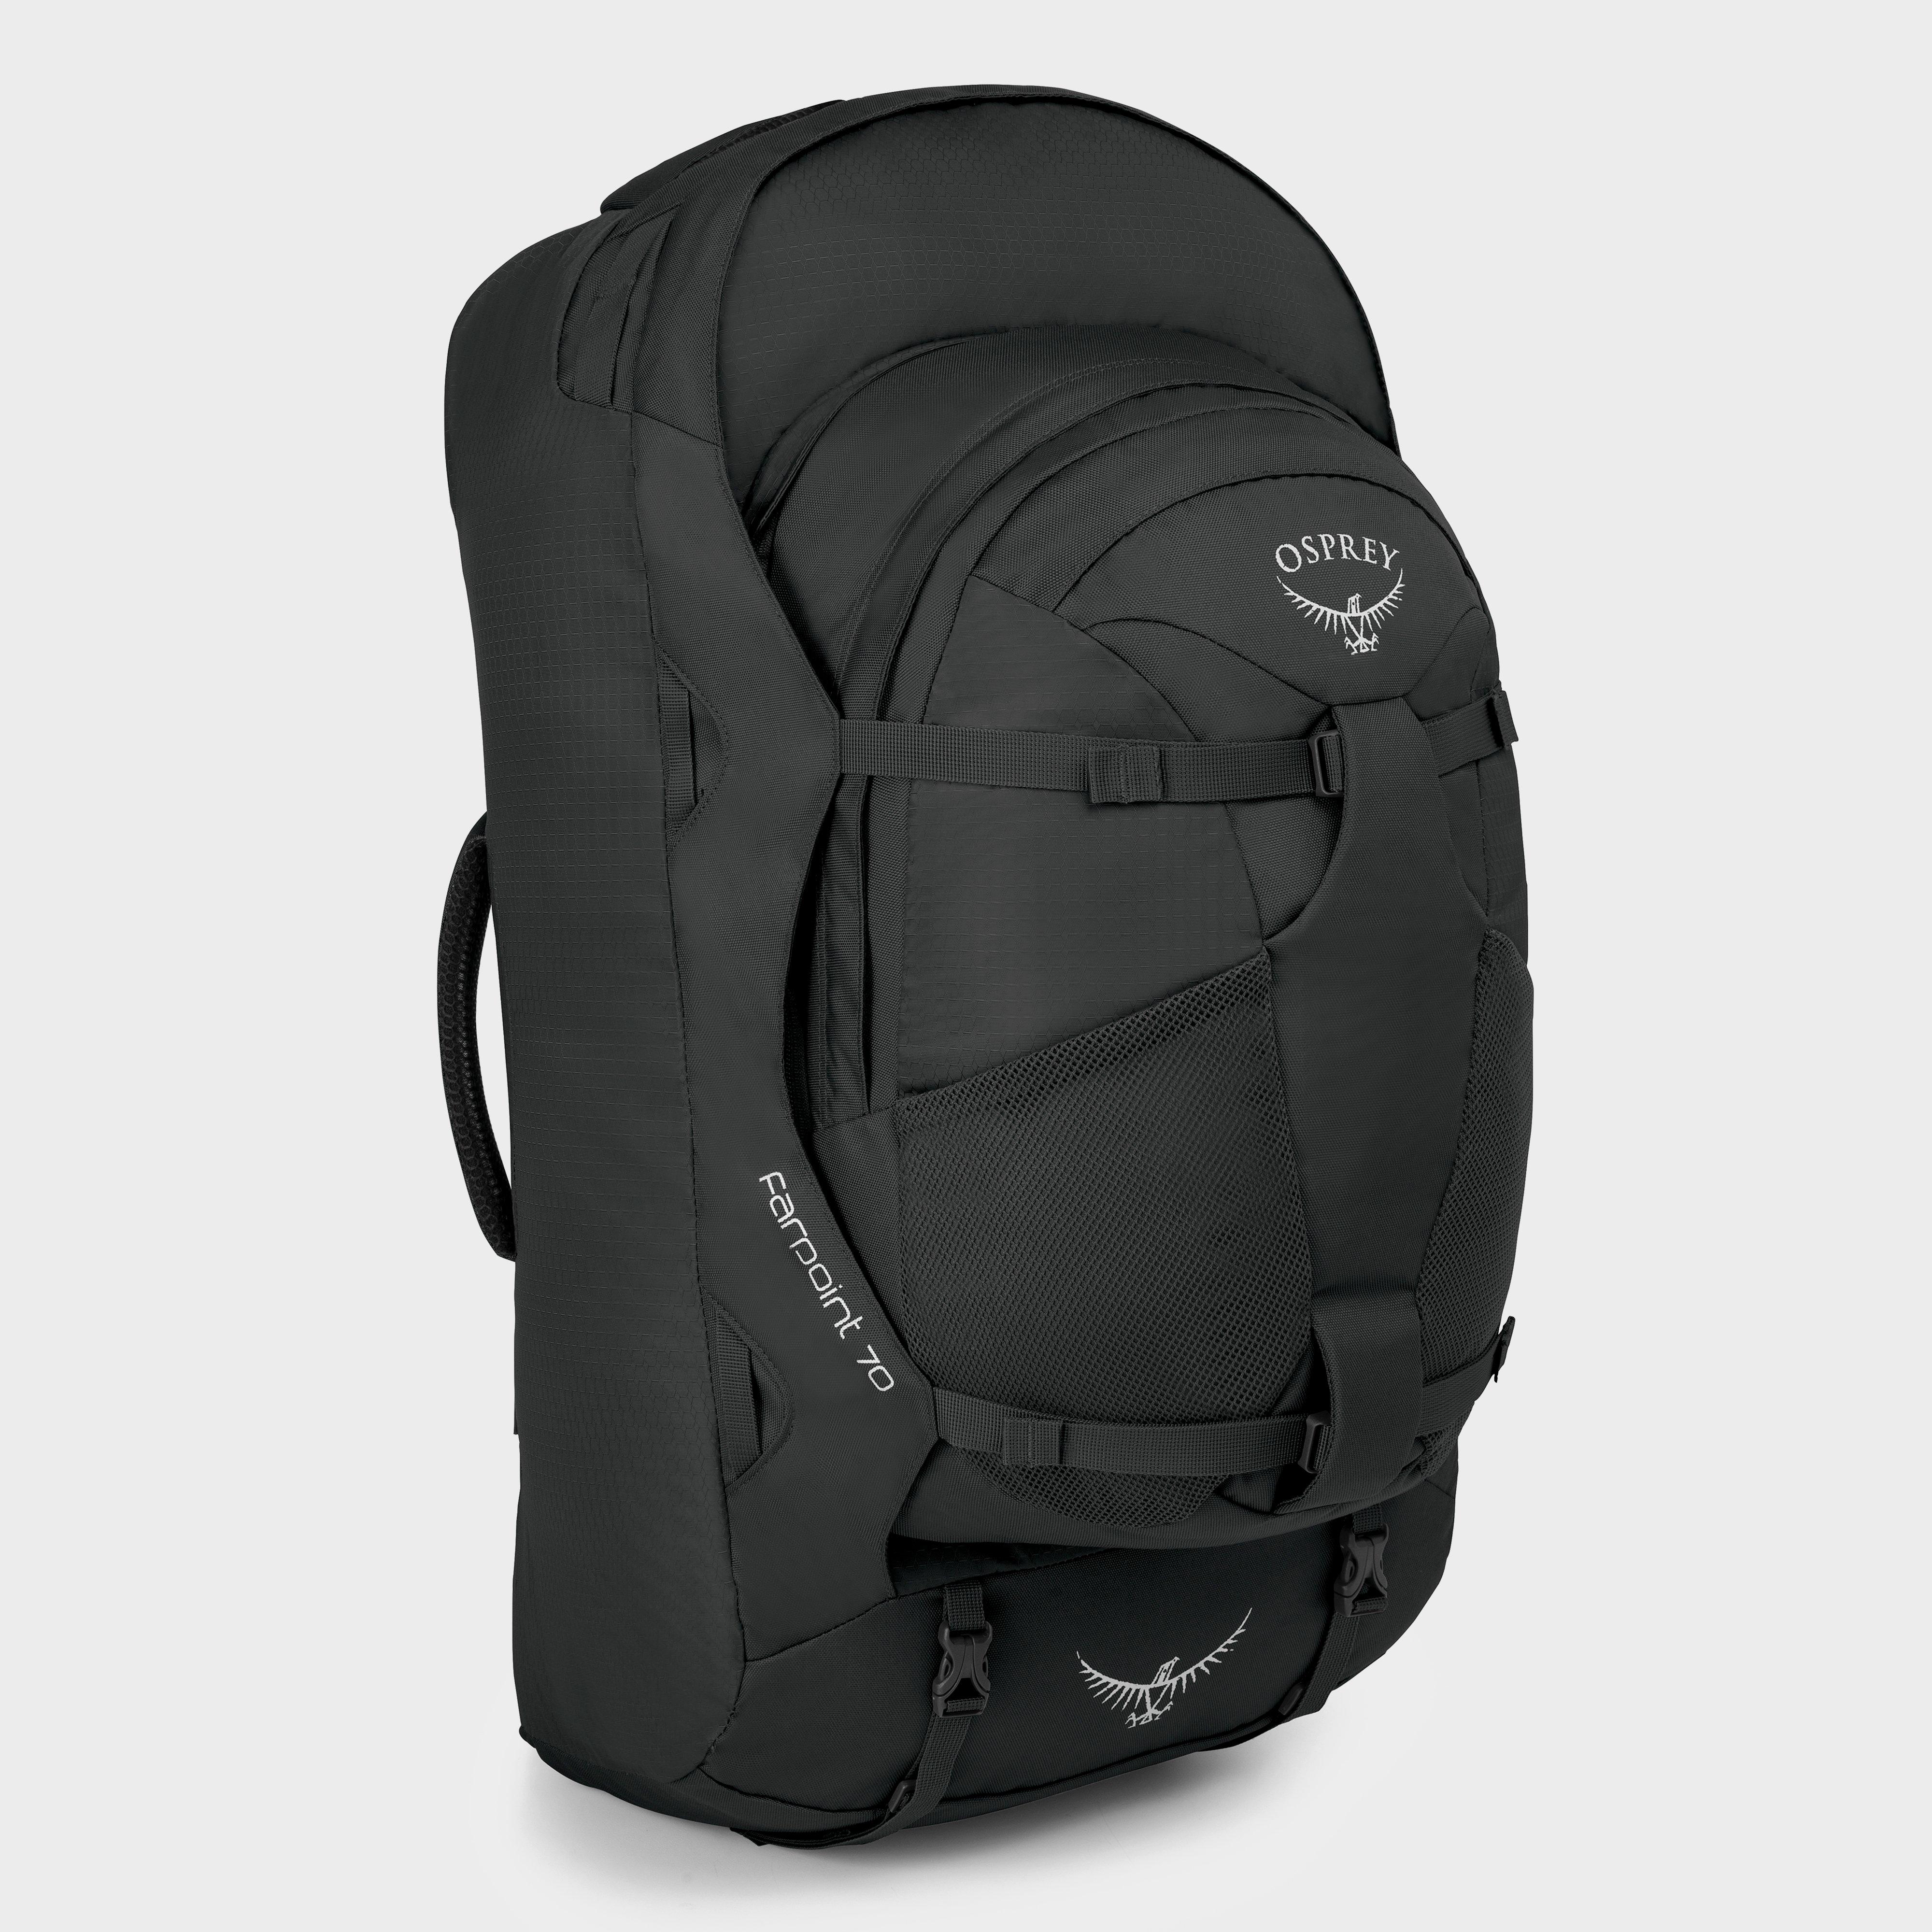 Osprey Farpoint 70 Backpack Review